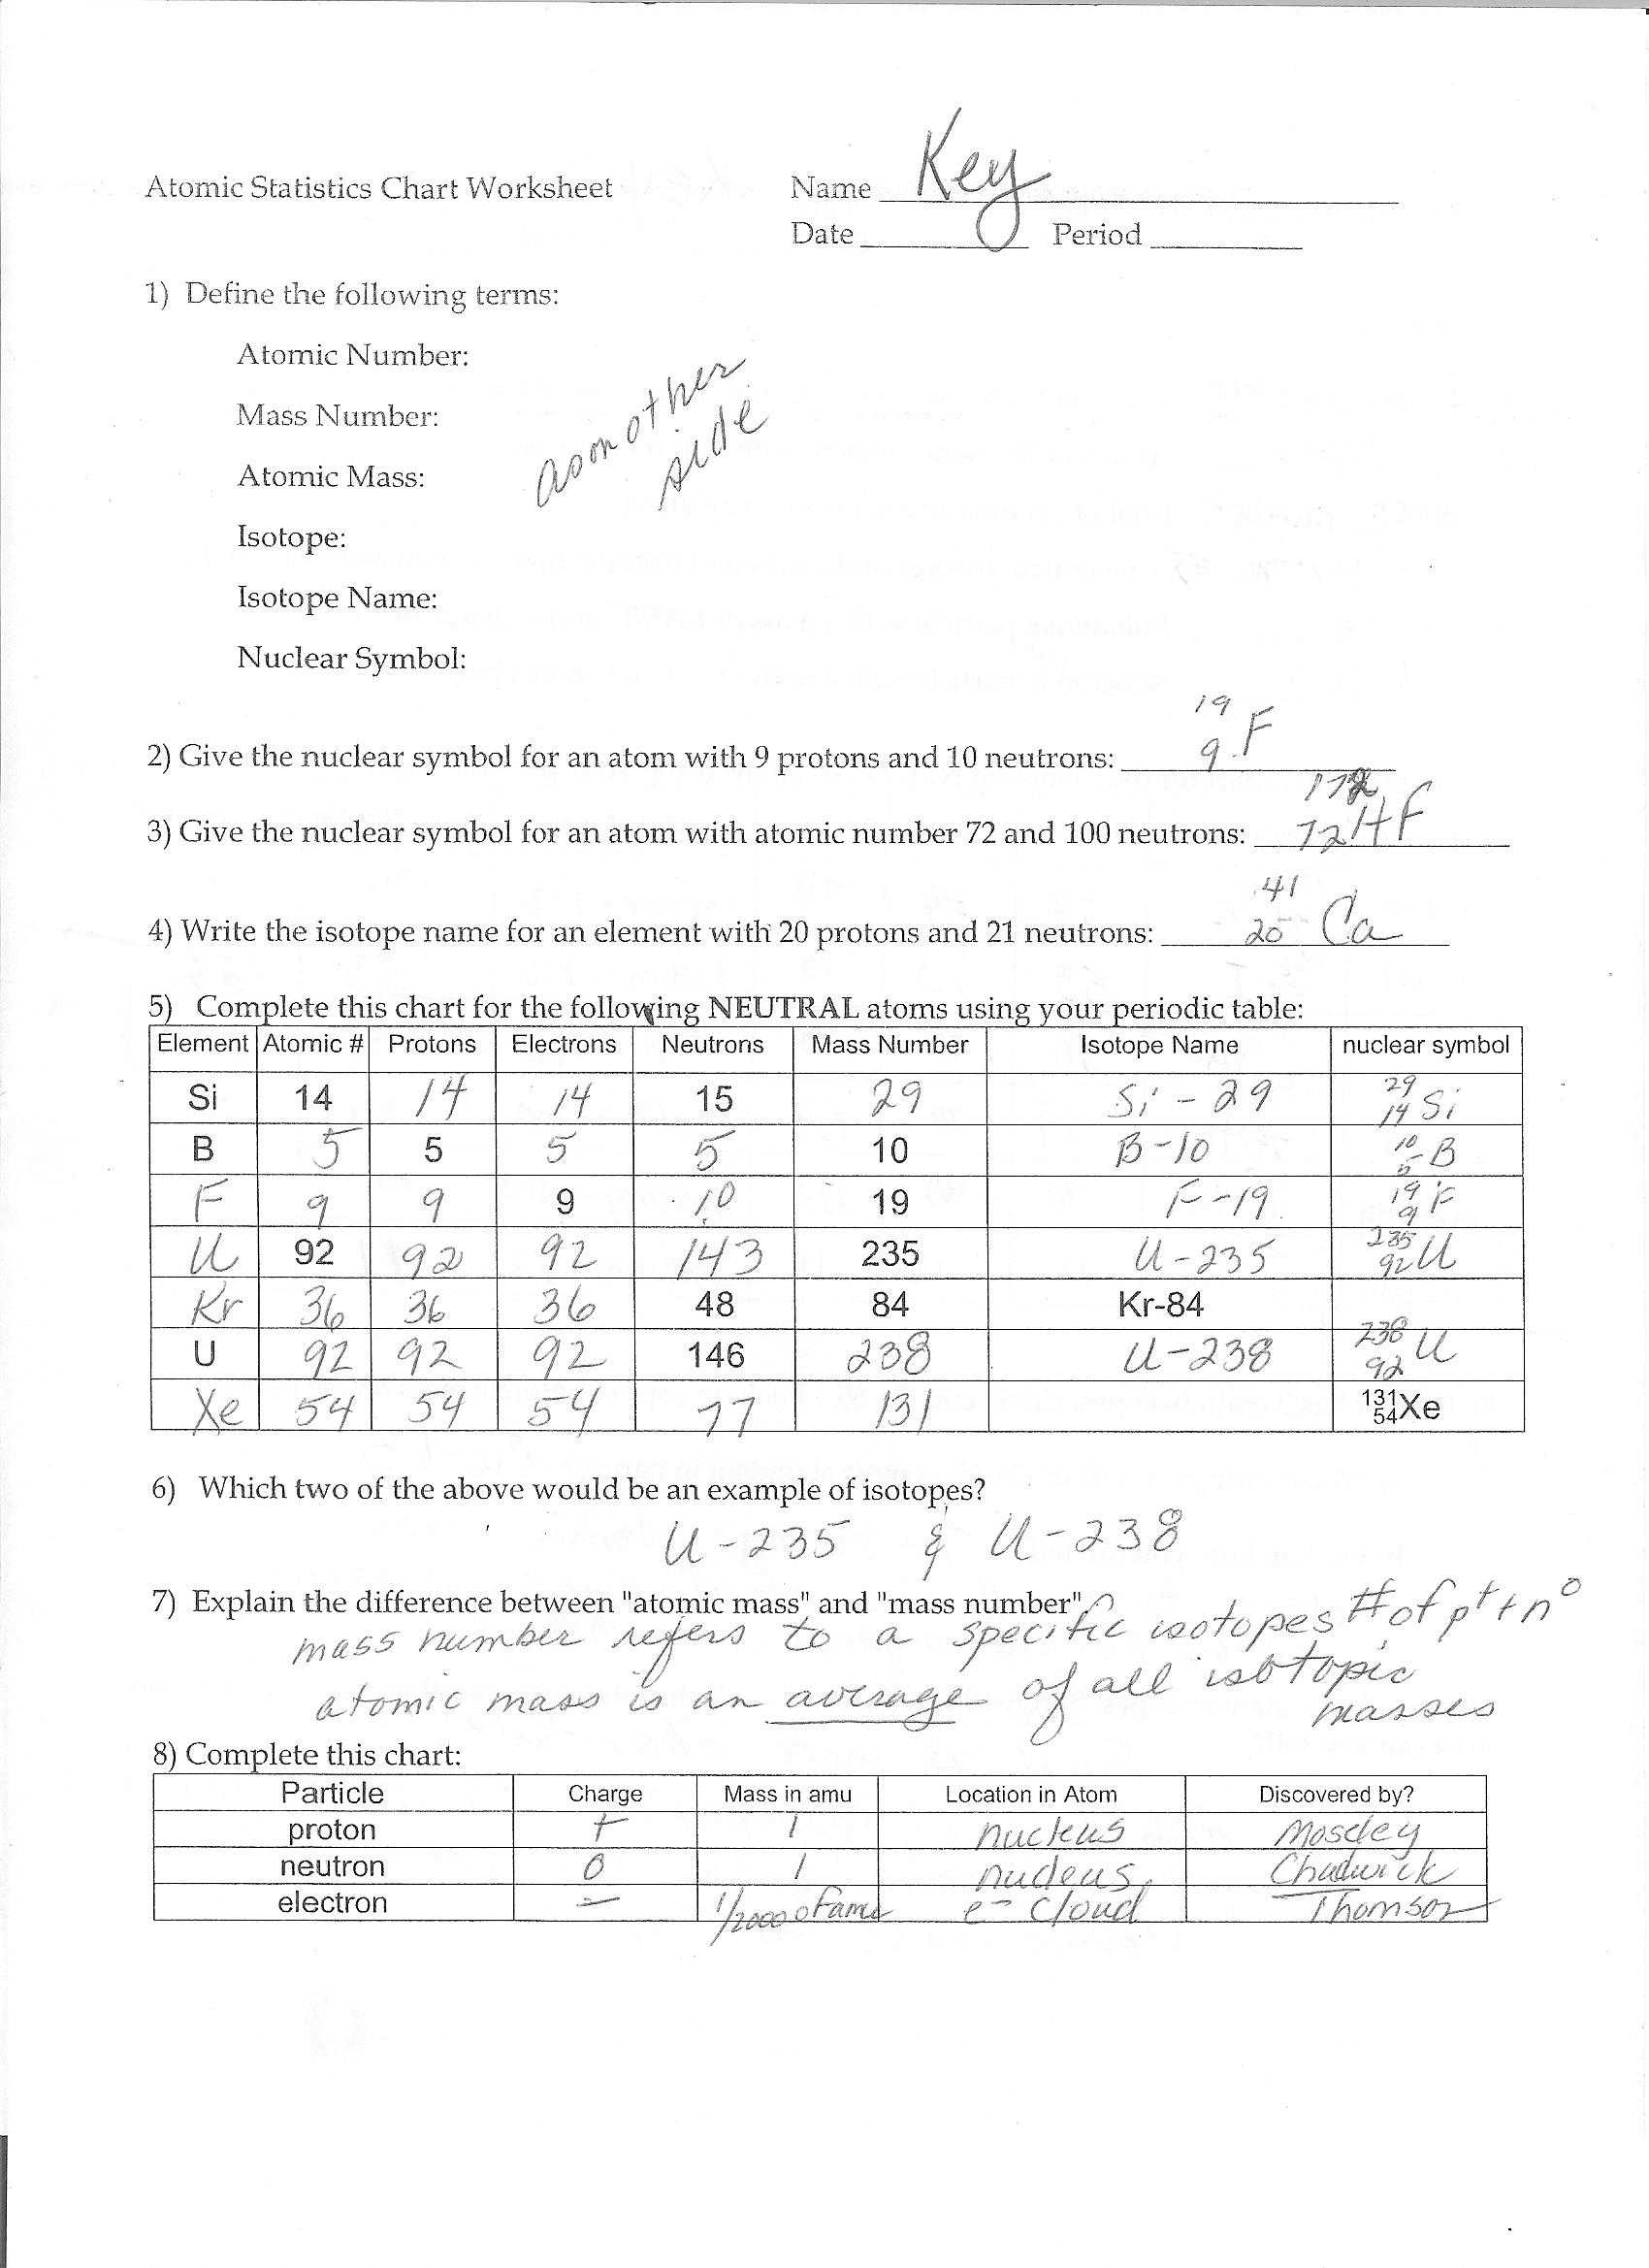 Wavelength Frequency and Energy Worksheet Answer Key Also Periodic Table Trends Worksheet Best Periodic Table Activity Lab